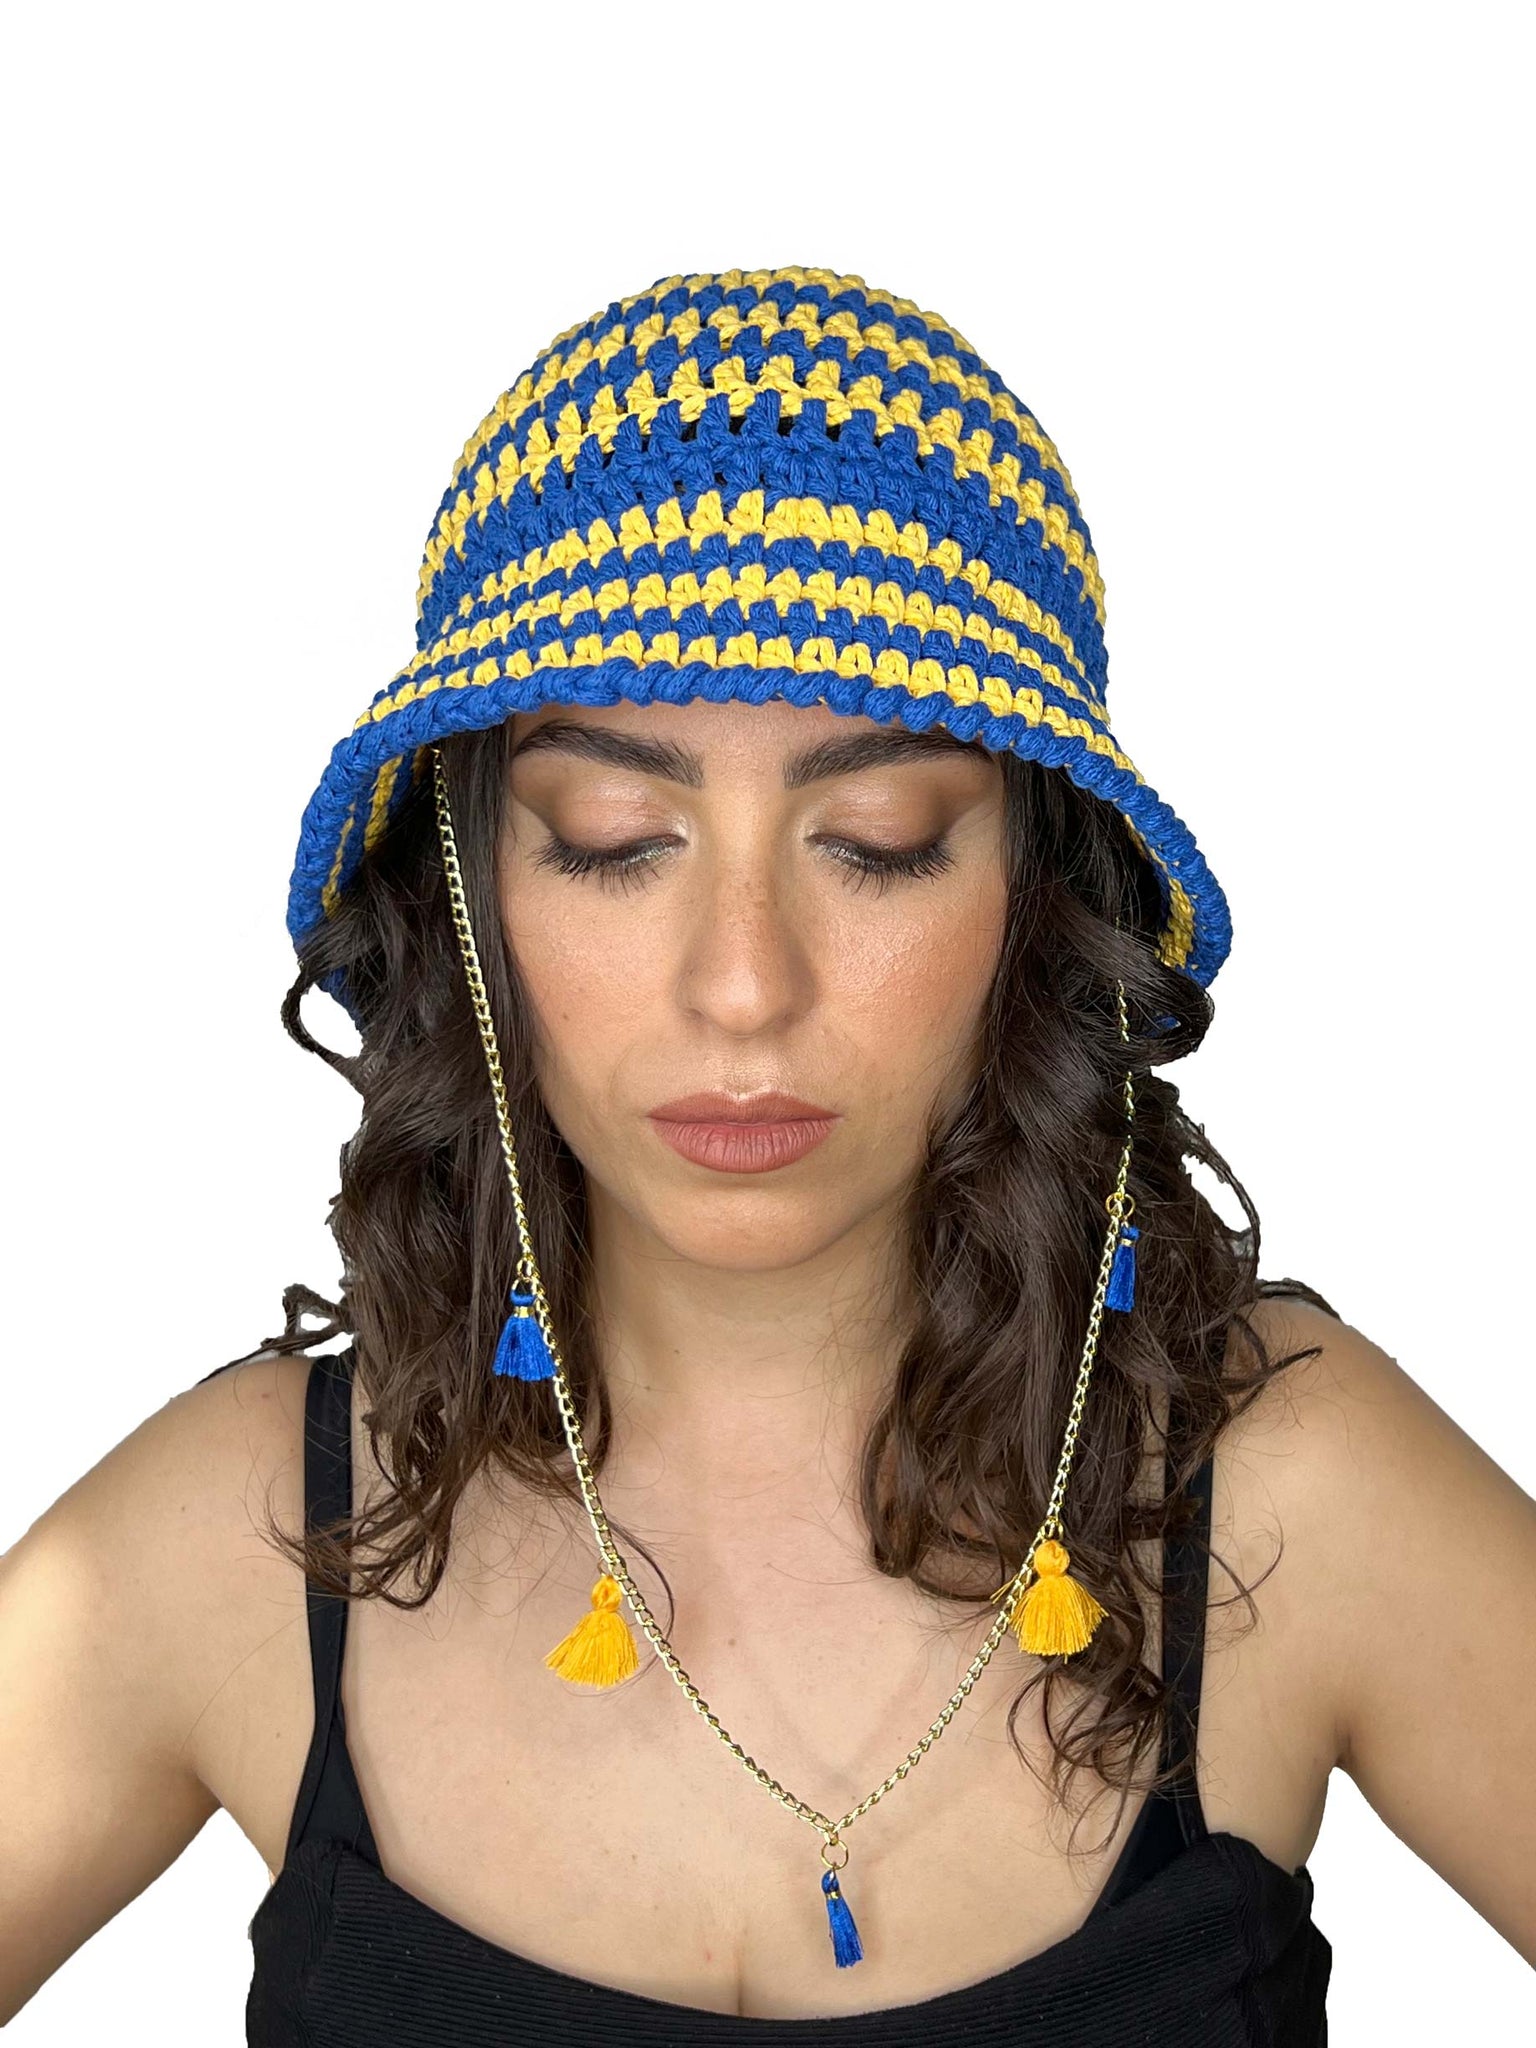 Blue/yellow striped crochet hat with chain